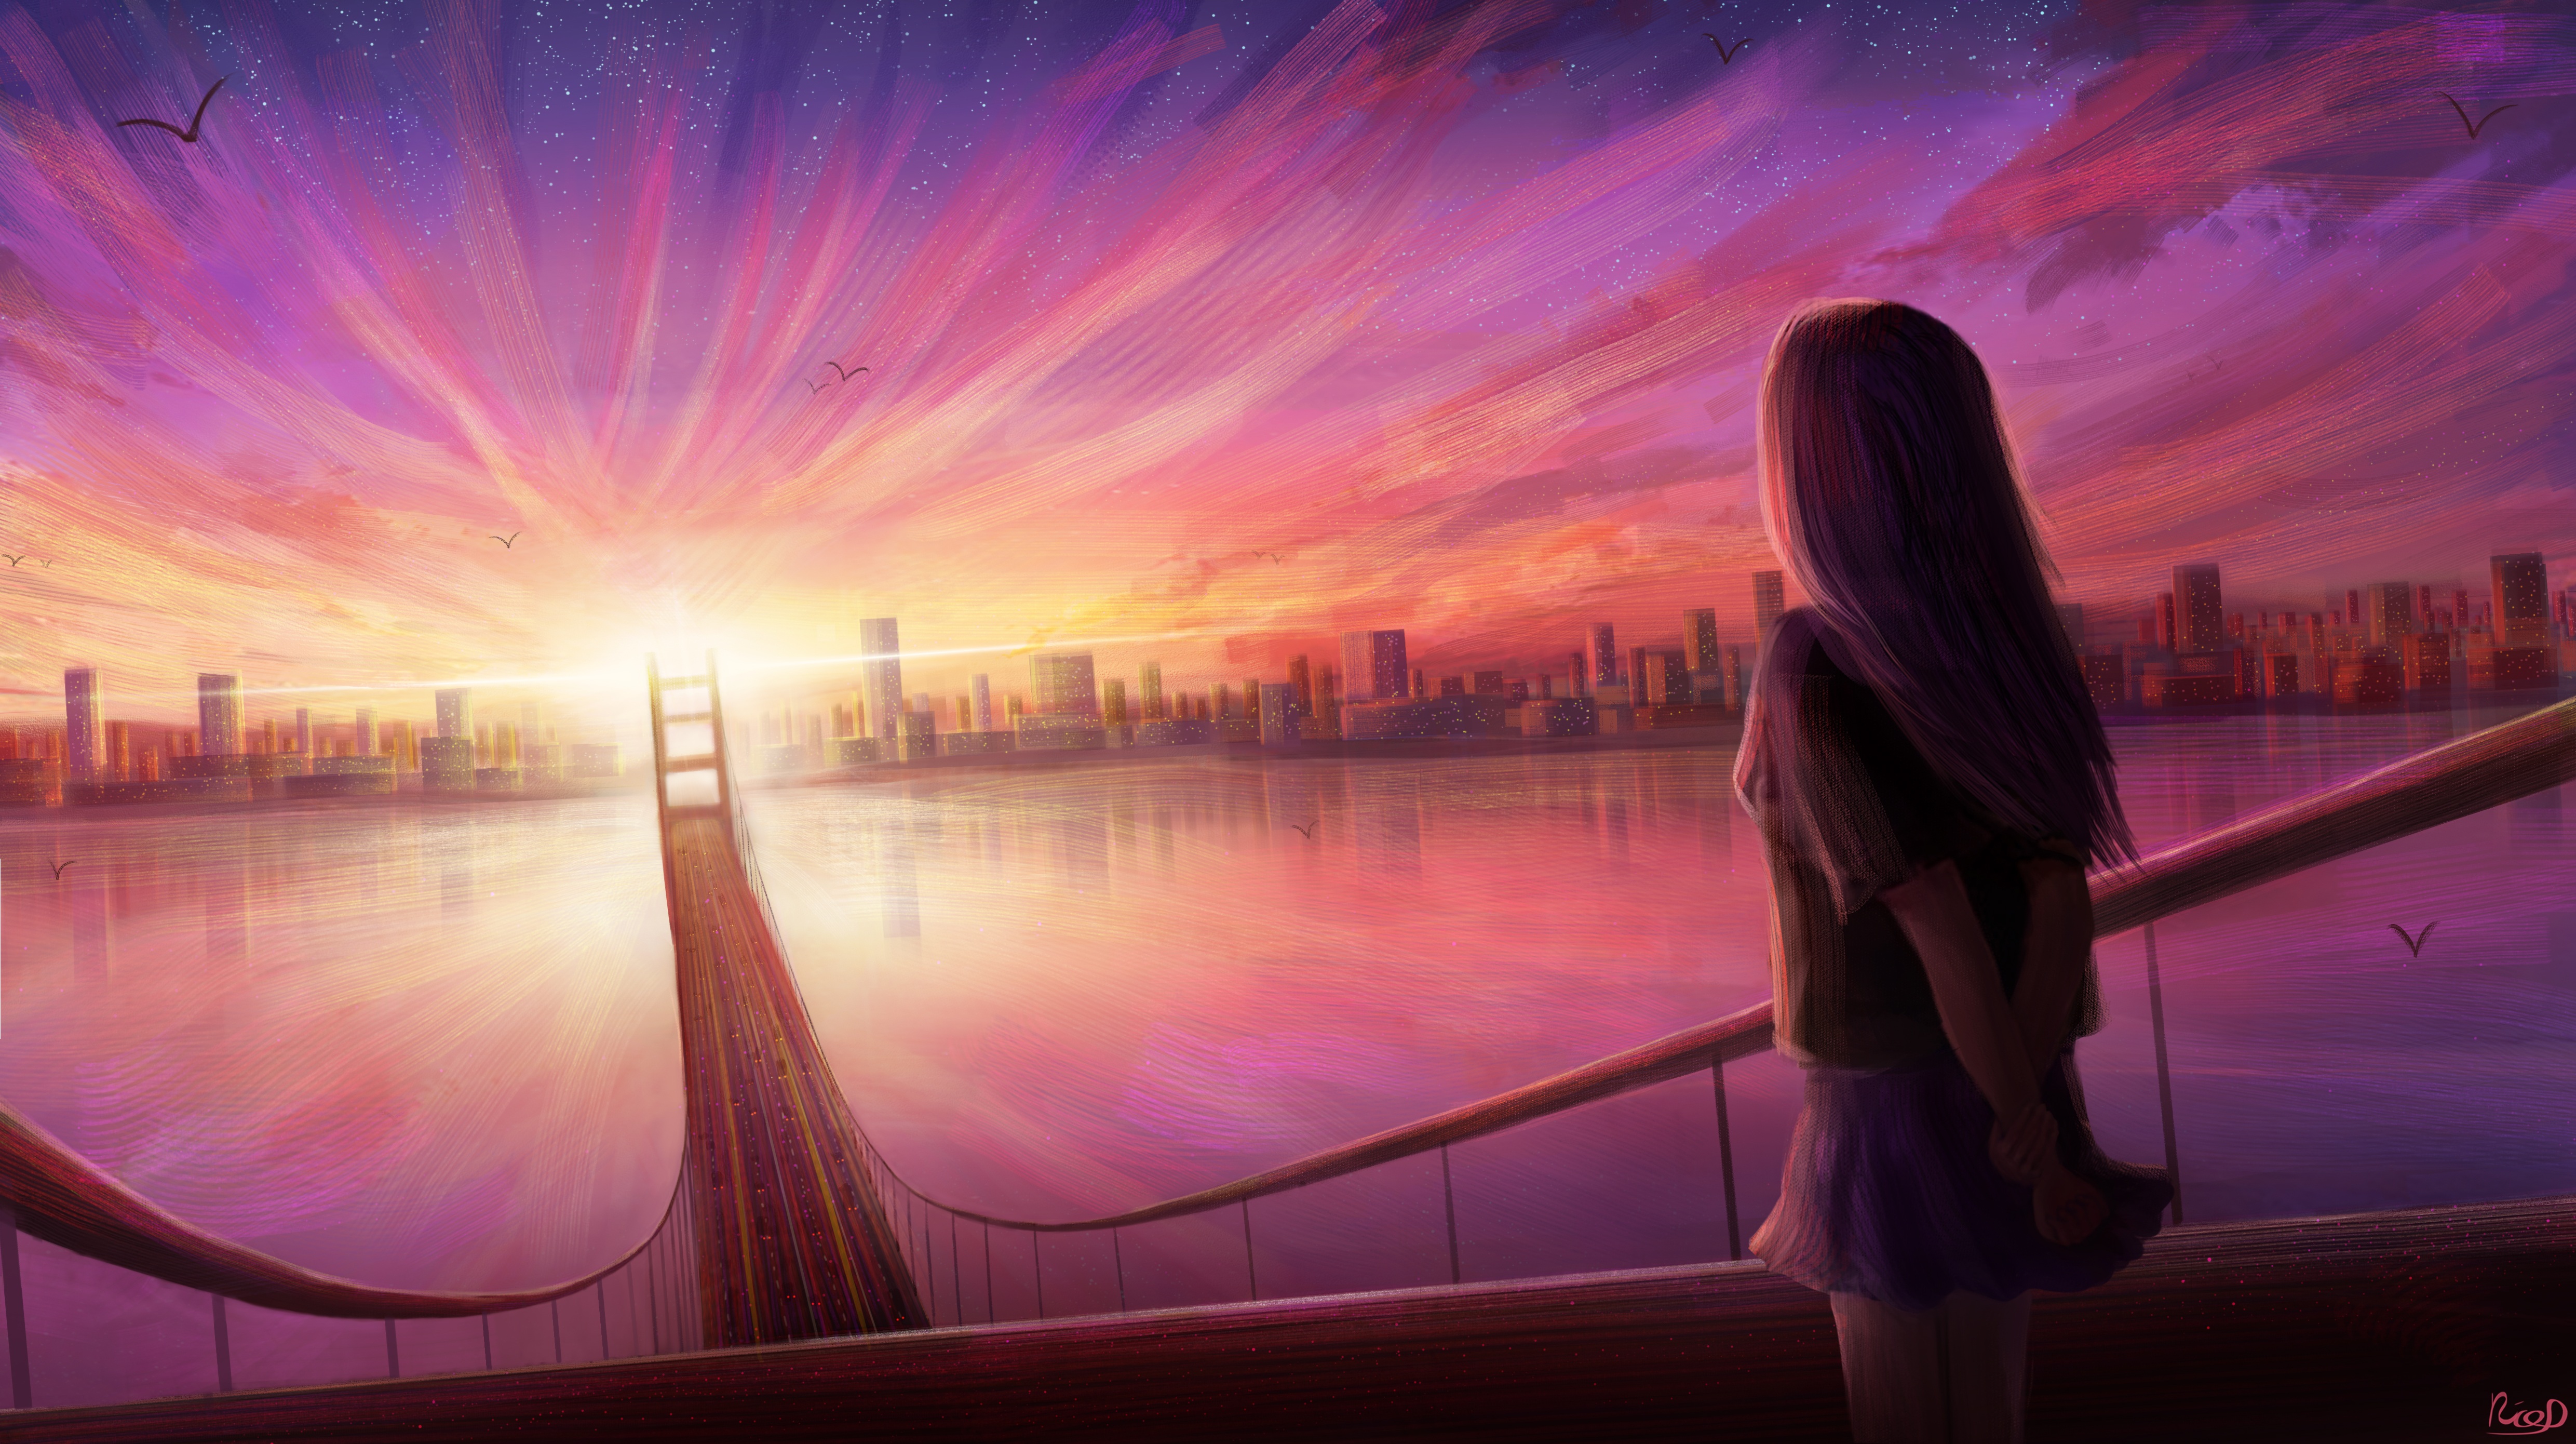 A girl looking at the sunset over water - Anime sunset